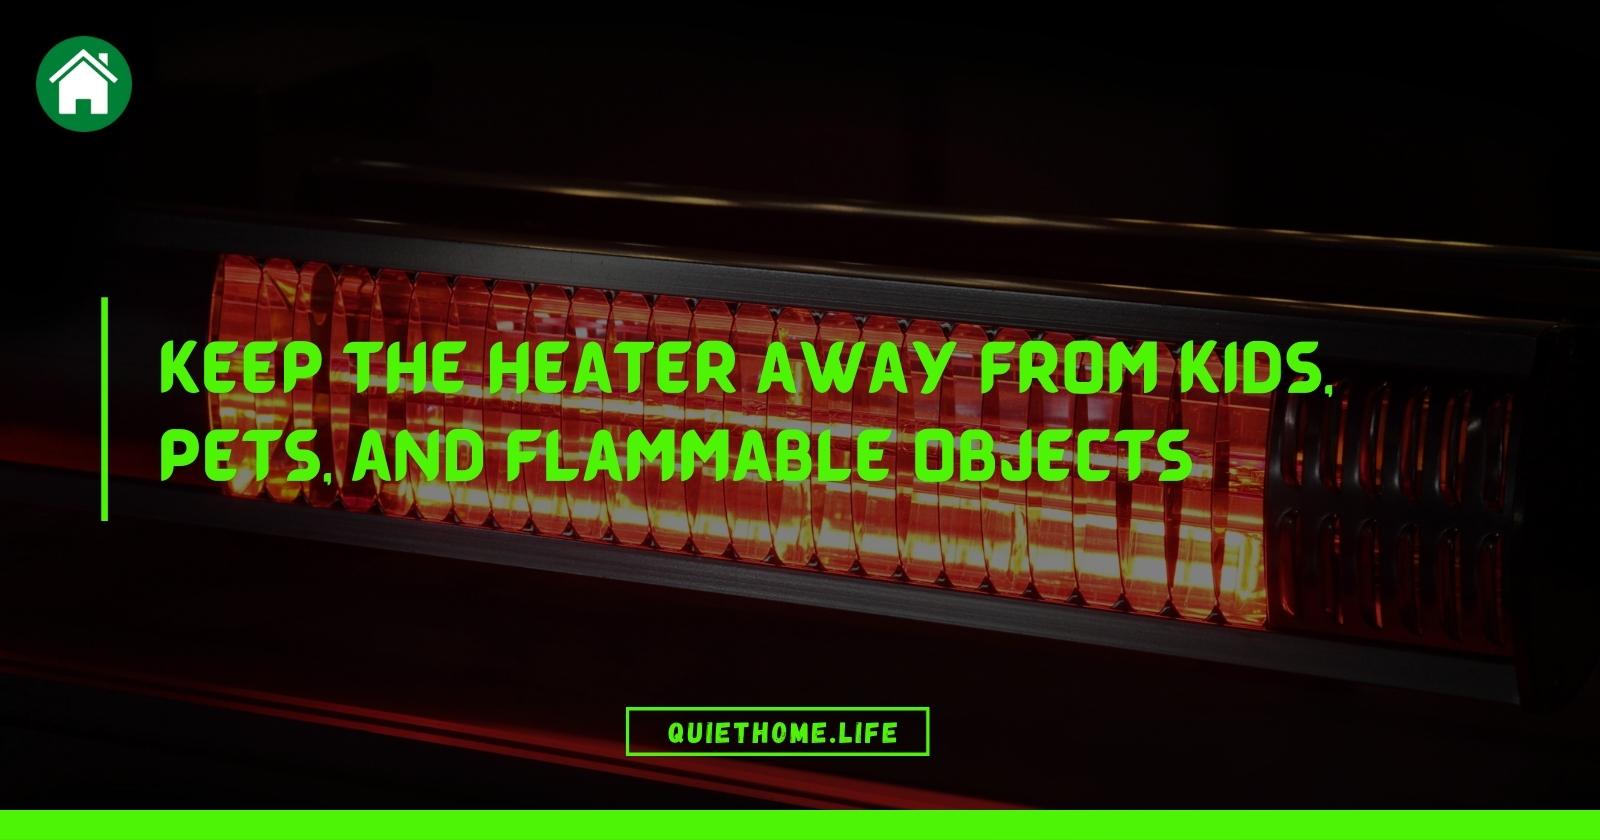 Keep the heater away from kids, pets, and flammable objects